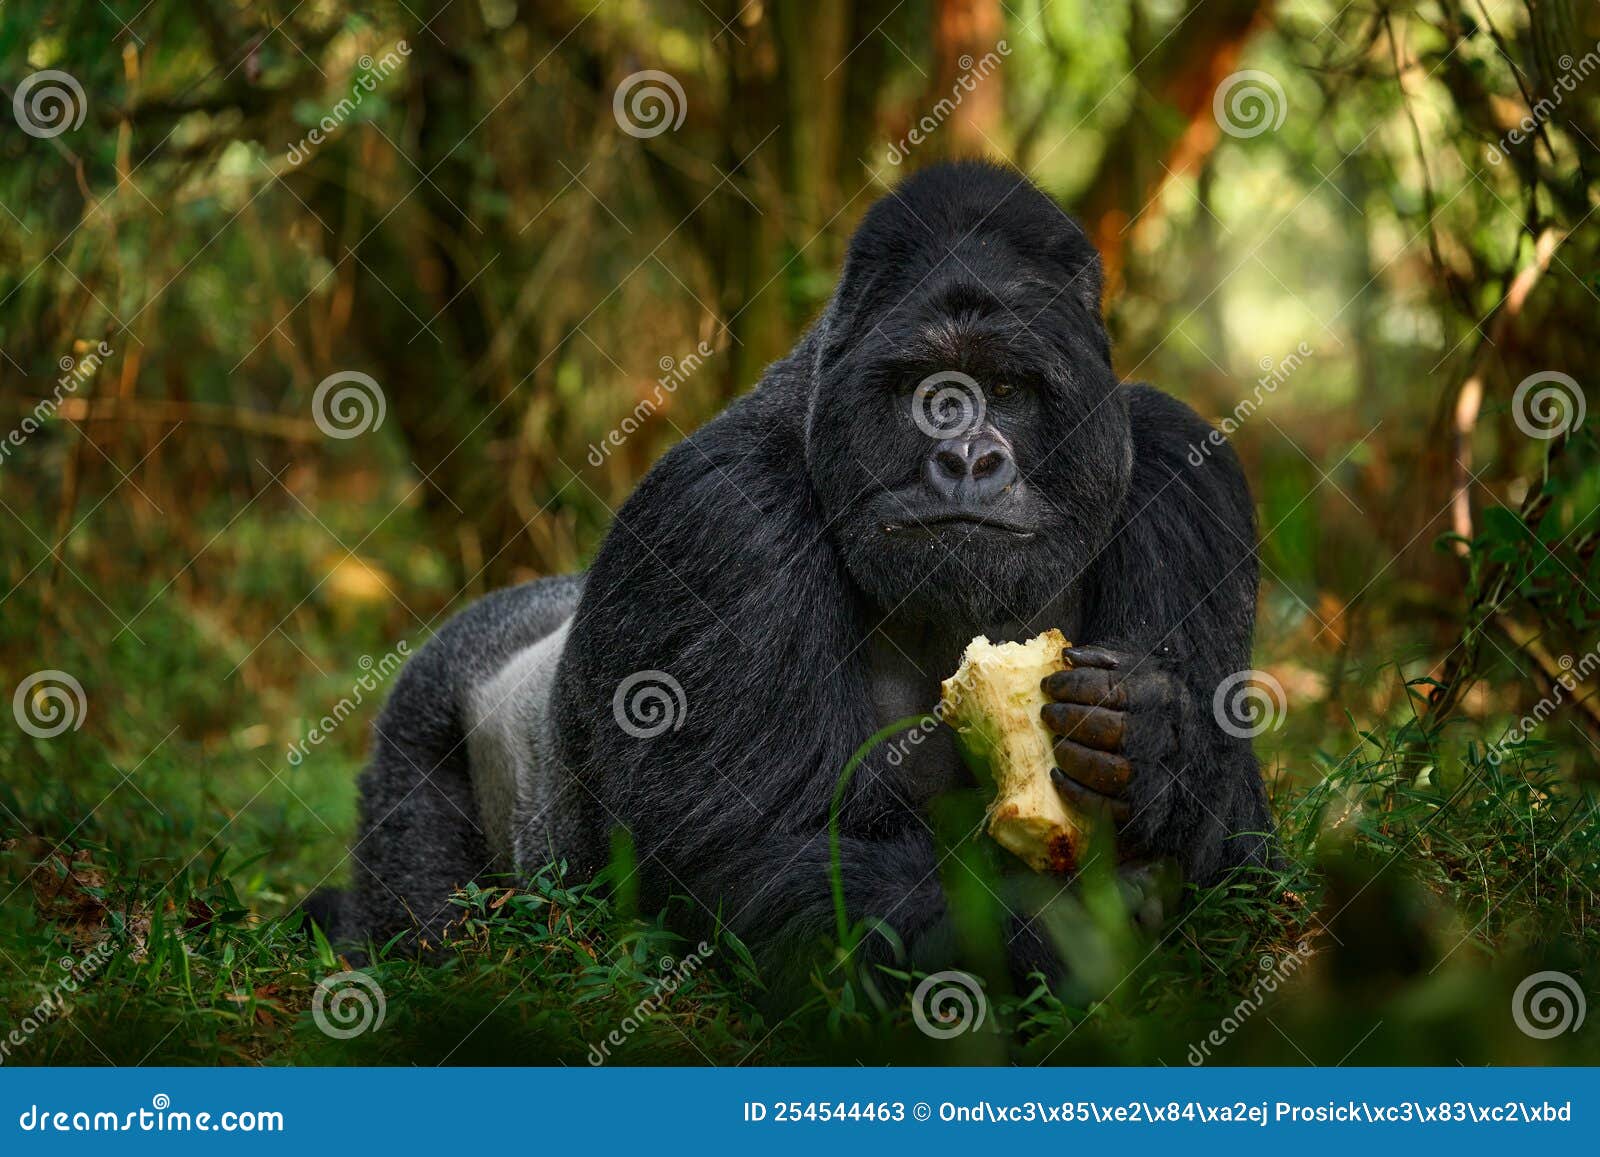 uganda mountain gorilla with food. detail head primate portrait with beautiful eyes. wildlife scene from nature. africa. mountain